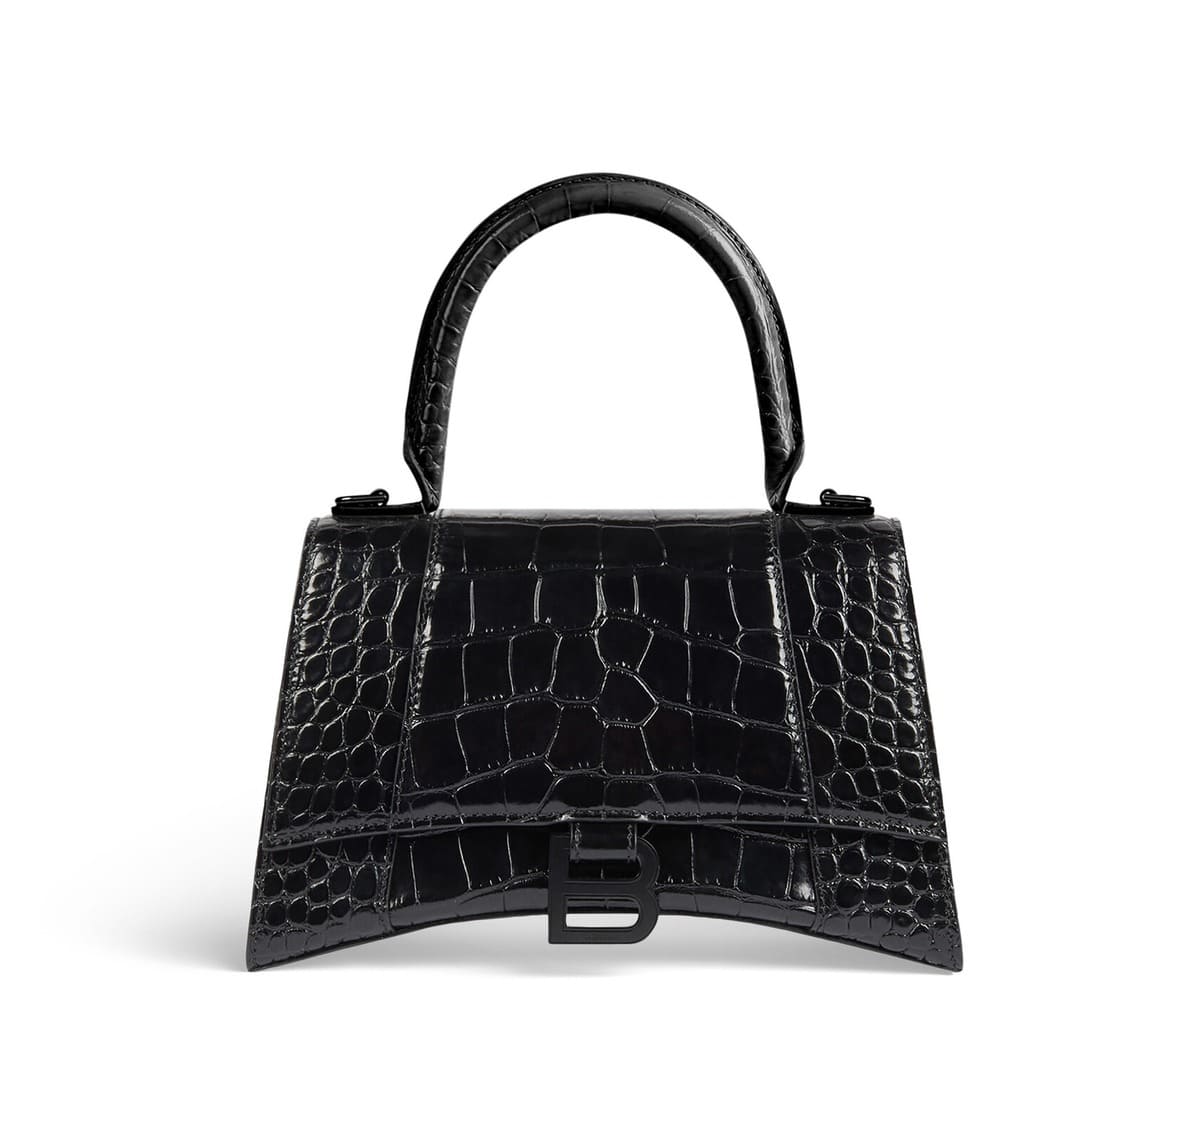 Balenciaga Hourglass Small Bag in Croc Embossed all black